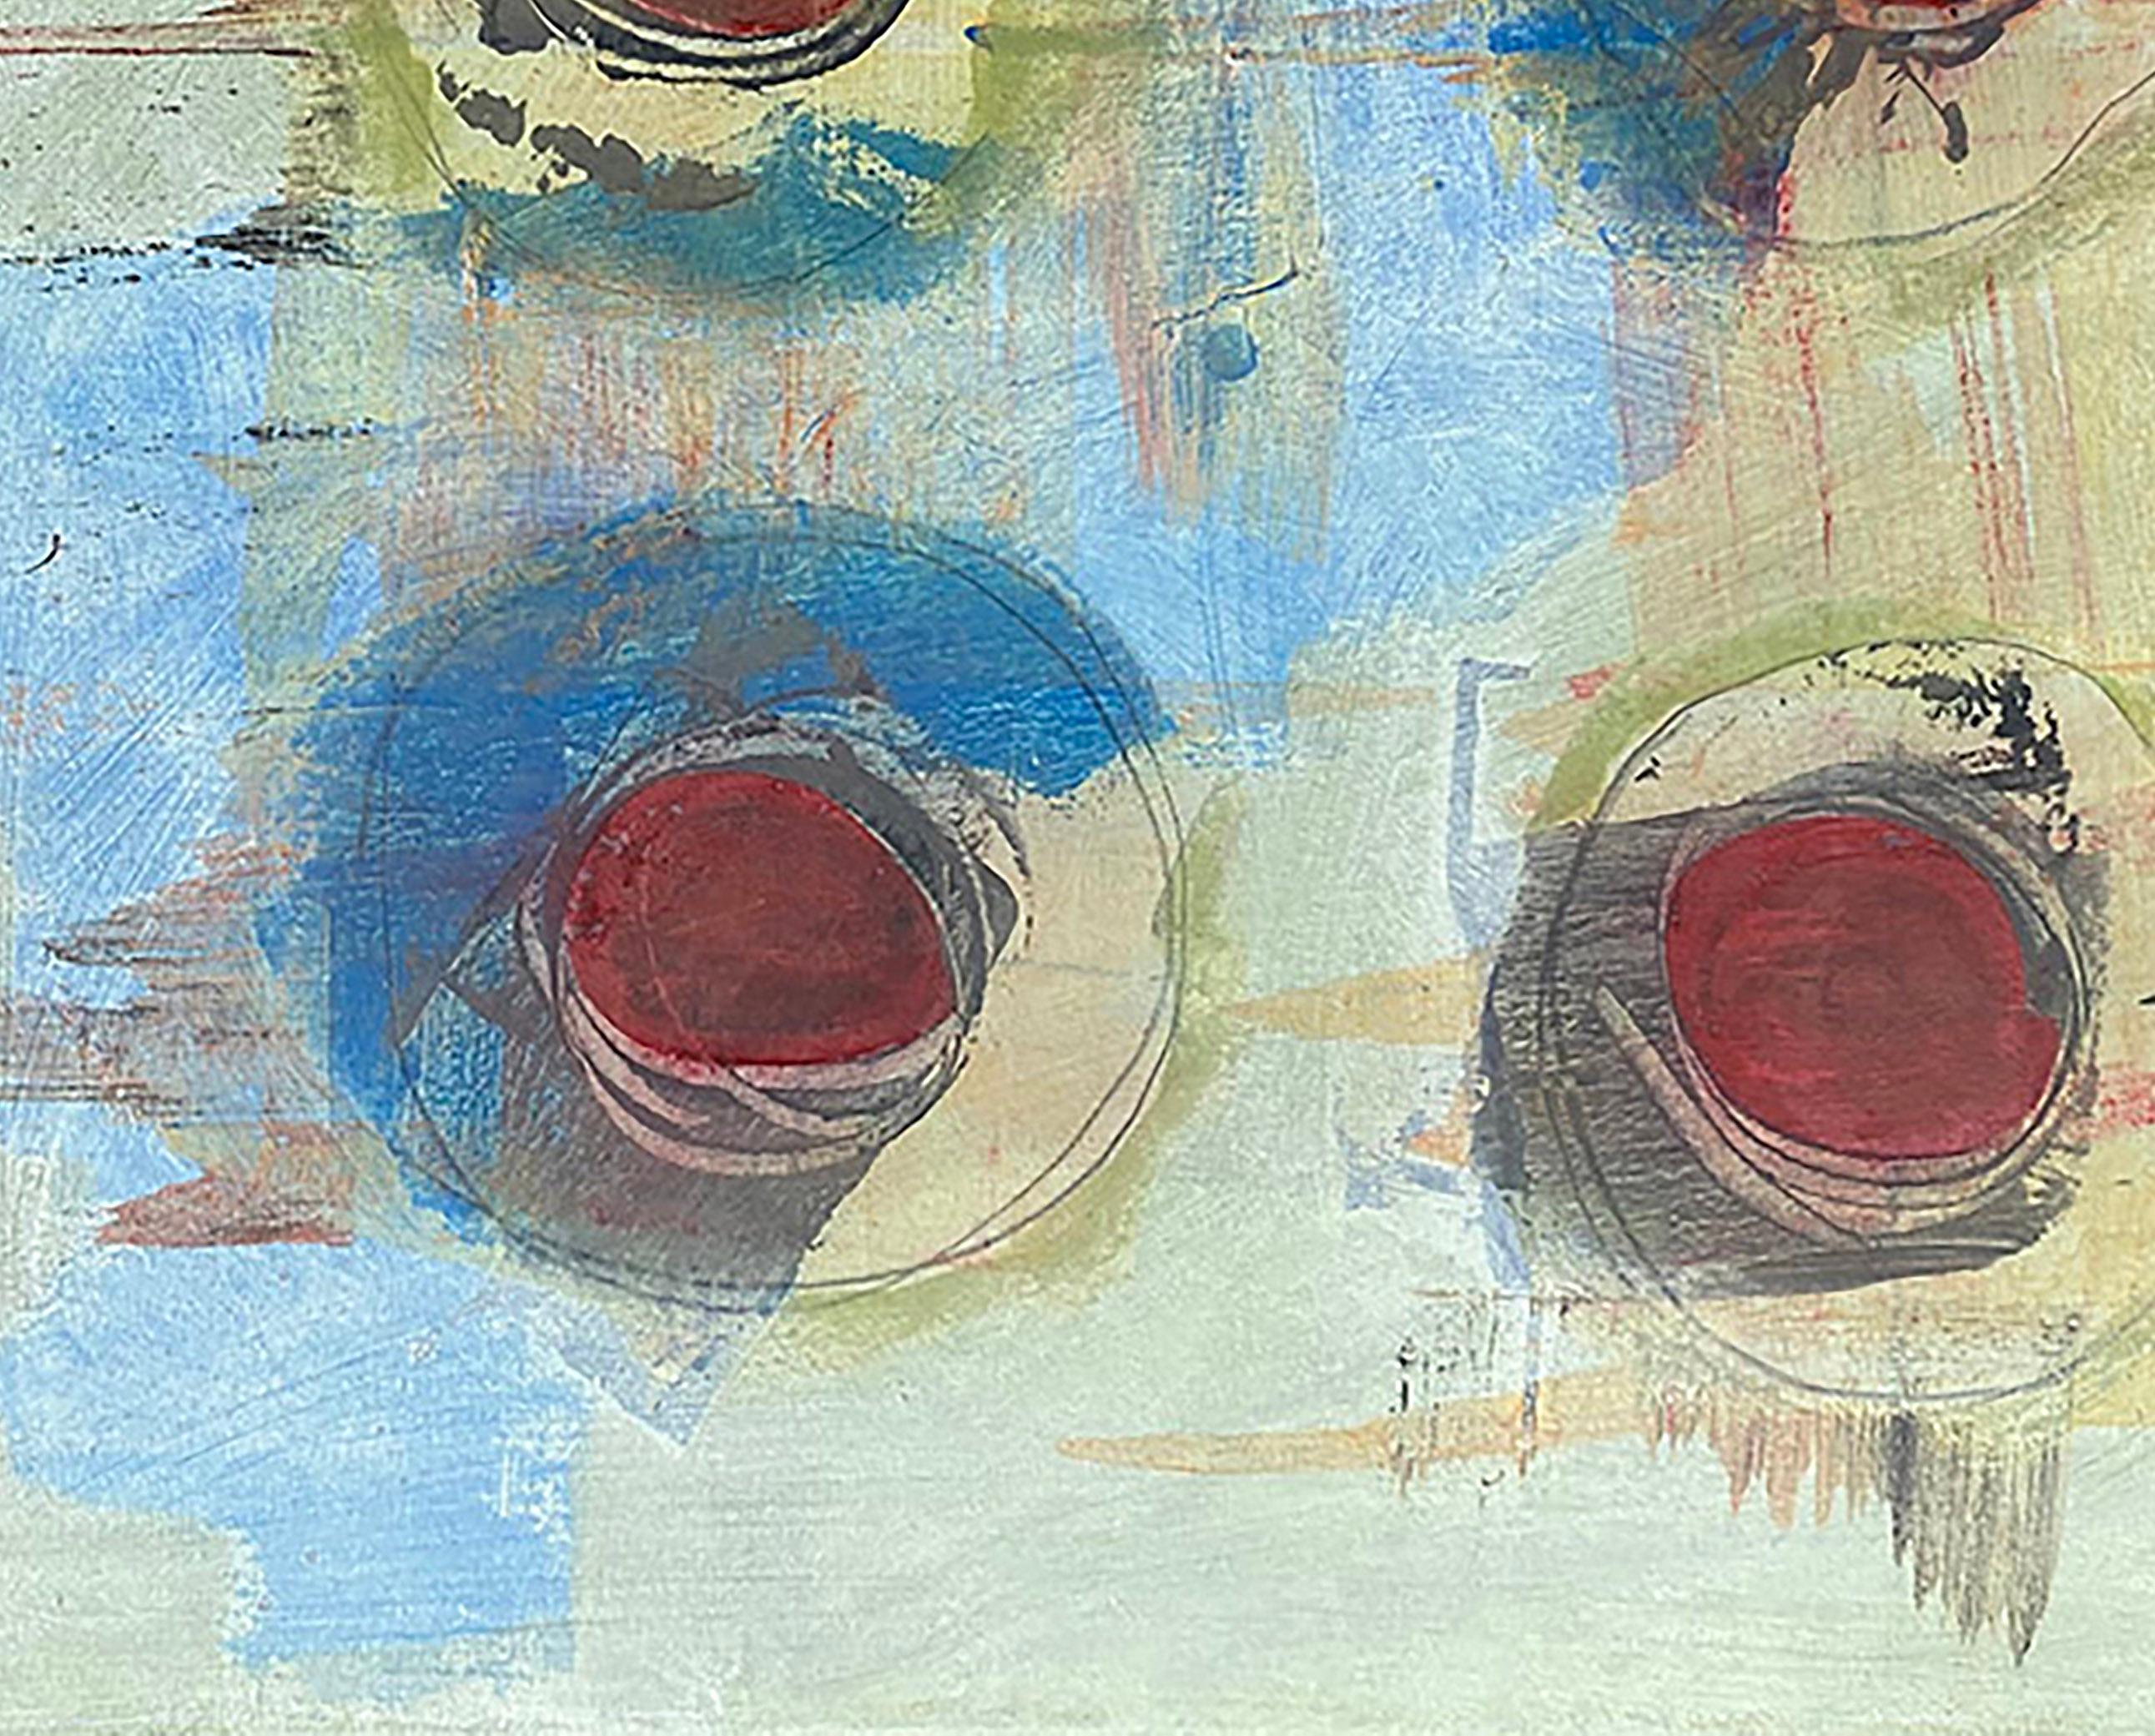 Childhoods #1, red, blue, yellow, light colors, circles, patterned - Abstract Geometric Painting by Ted Dixon